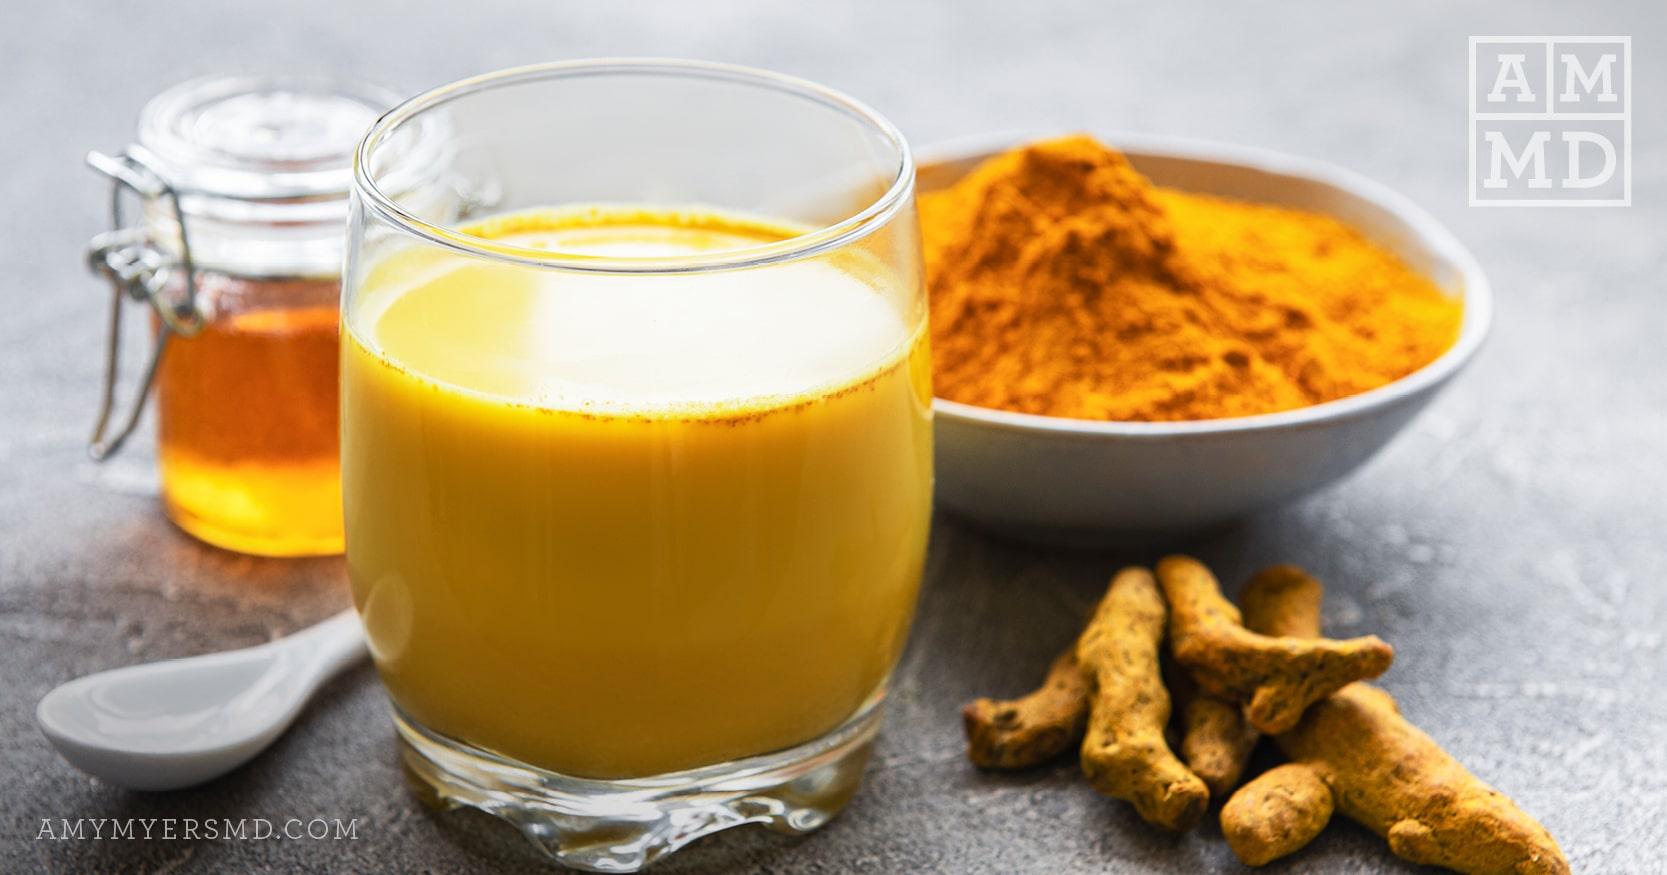 The Benefits of Bioavailable Curcumin